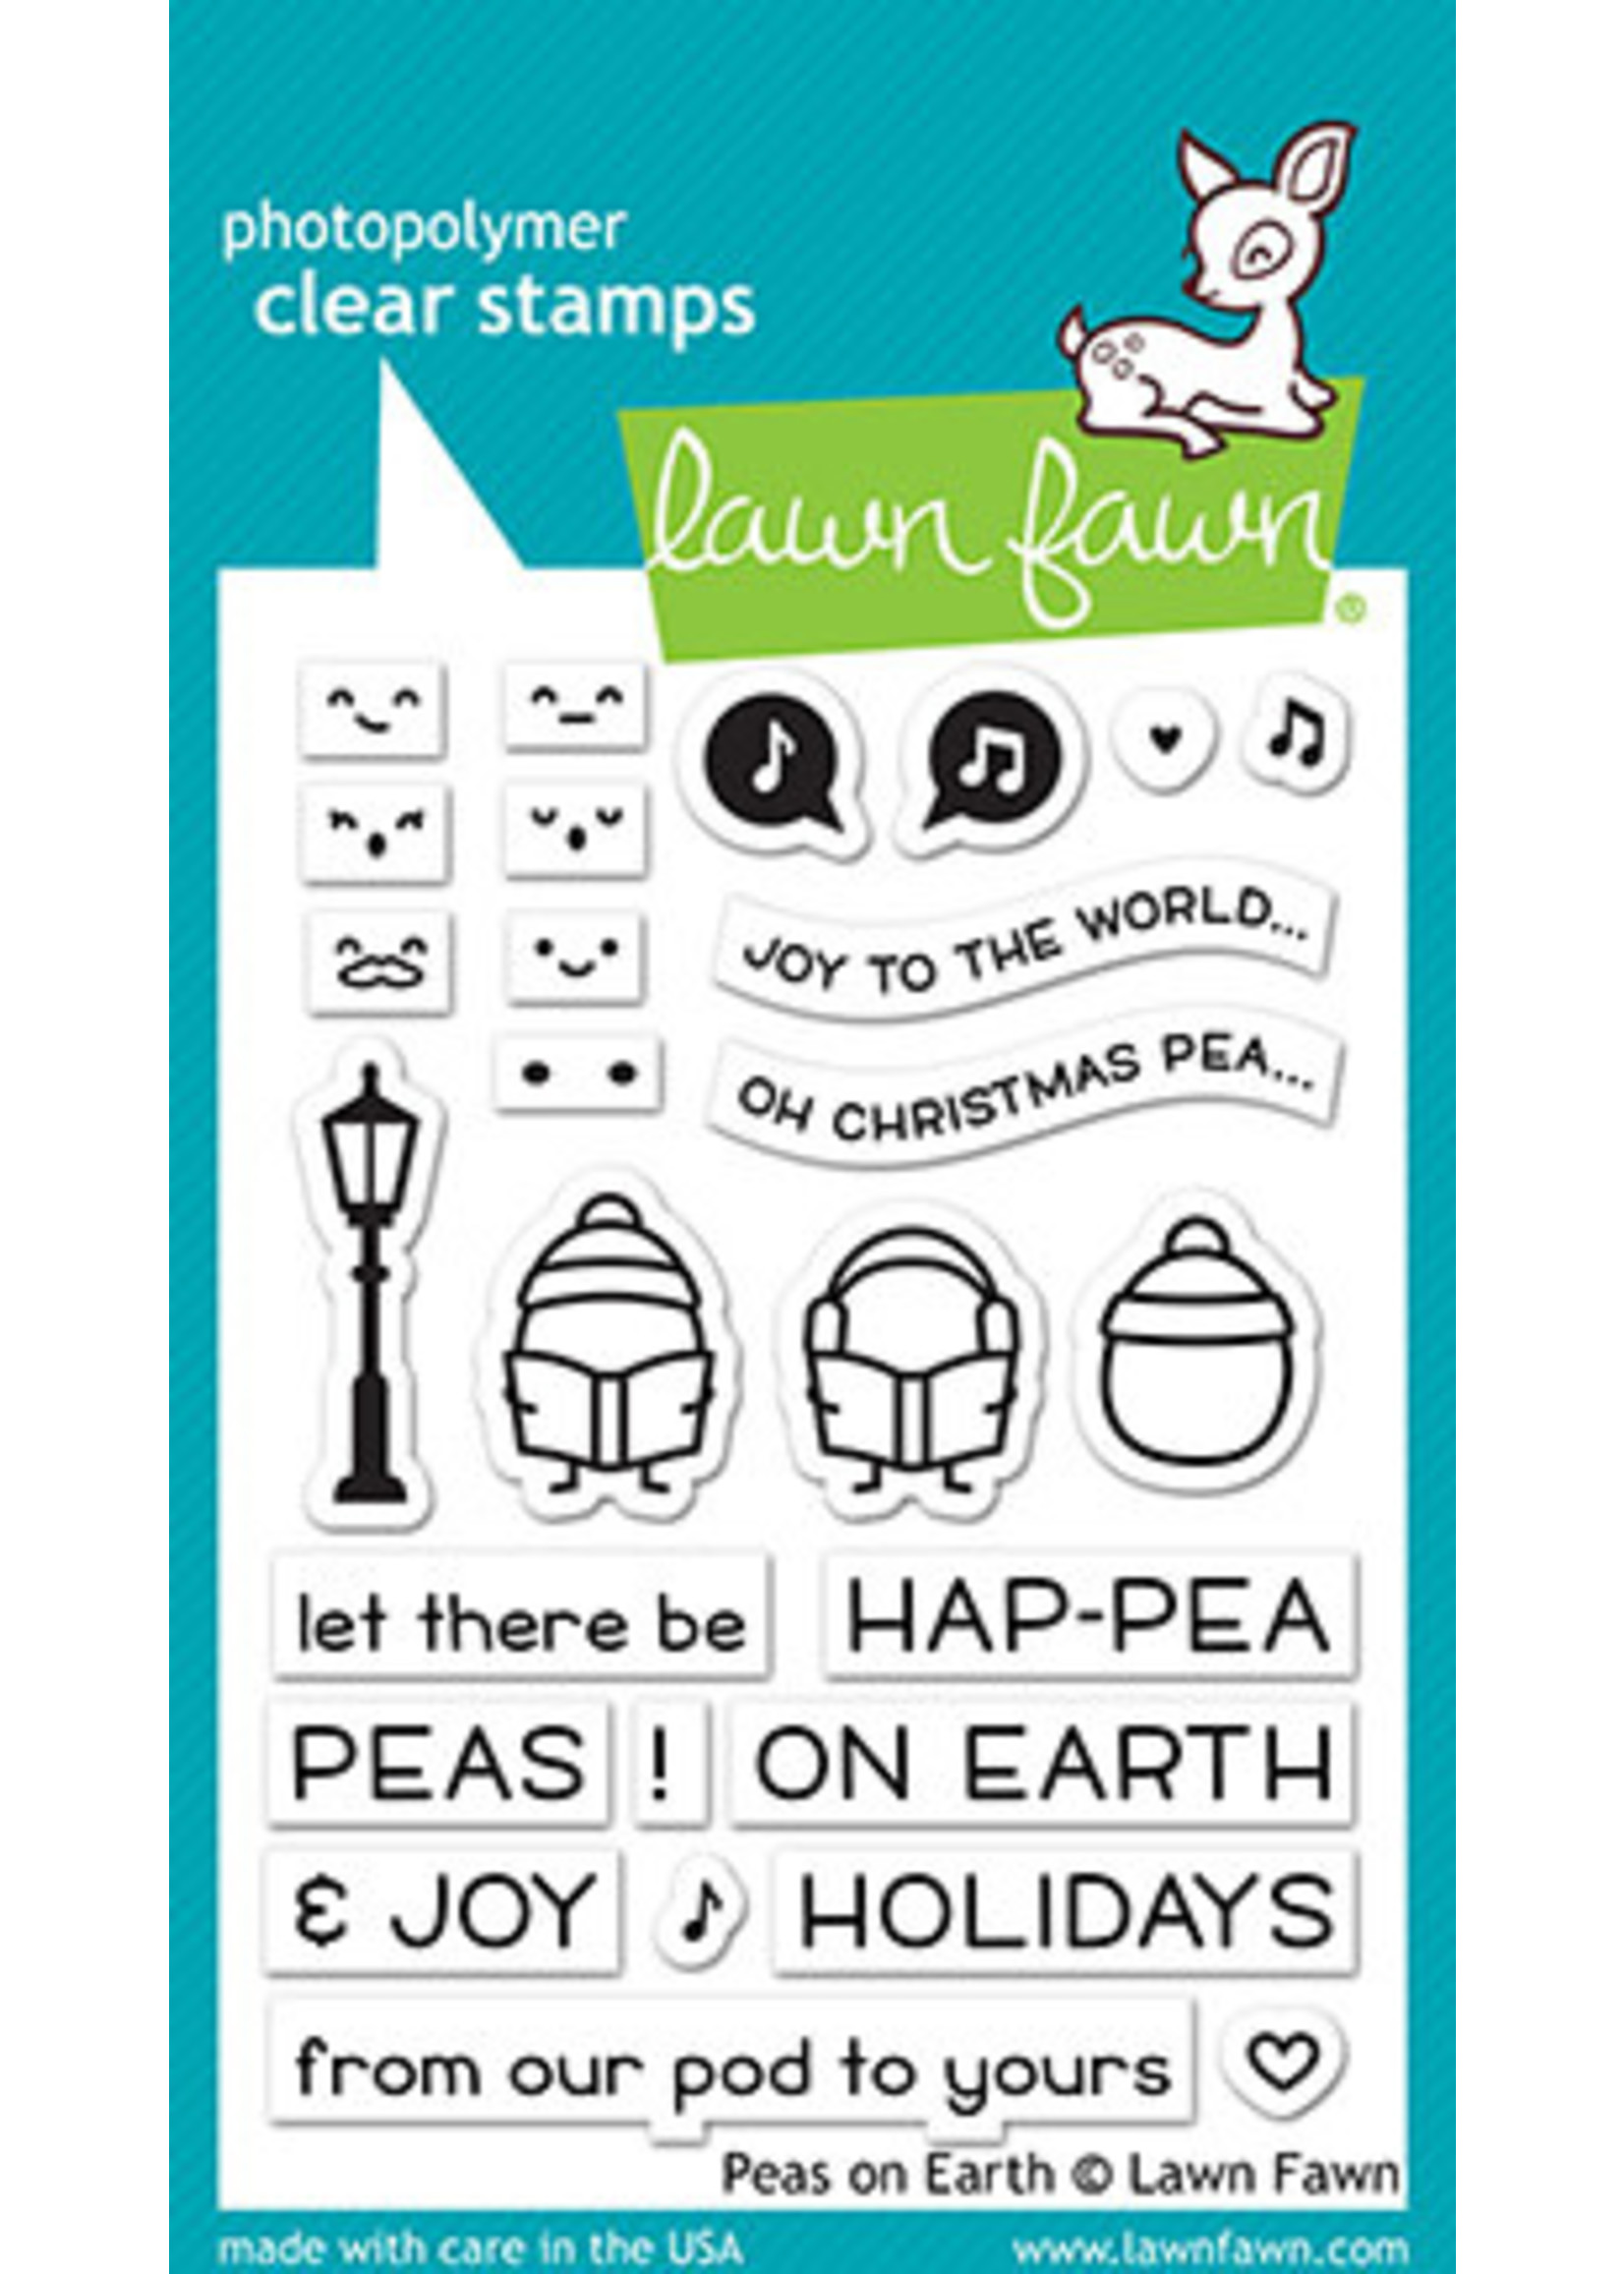 Lawn Fawn peas on earth stamp